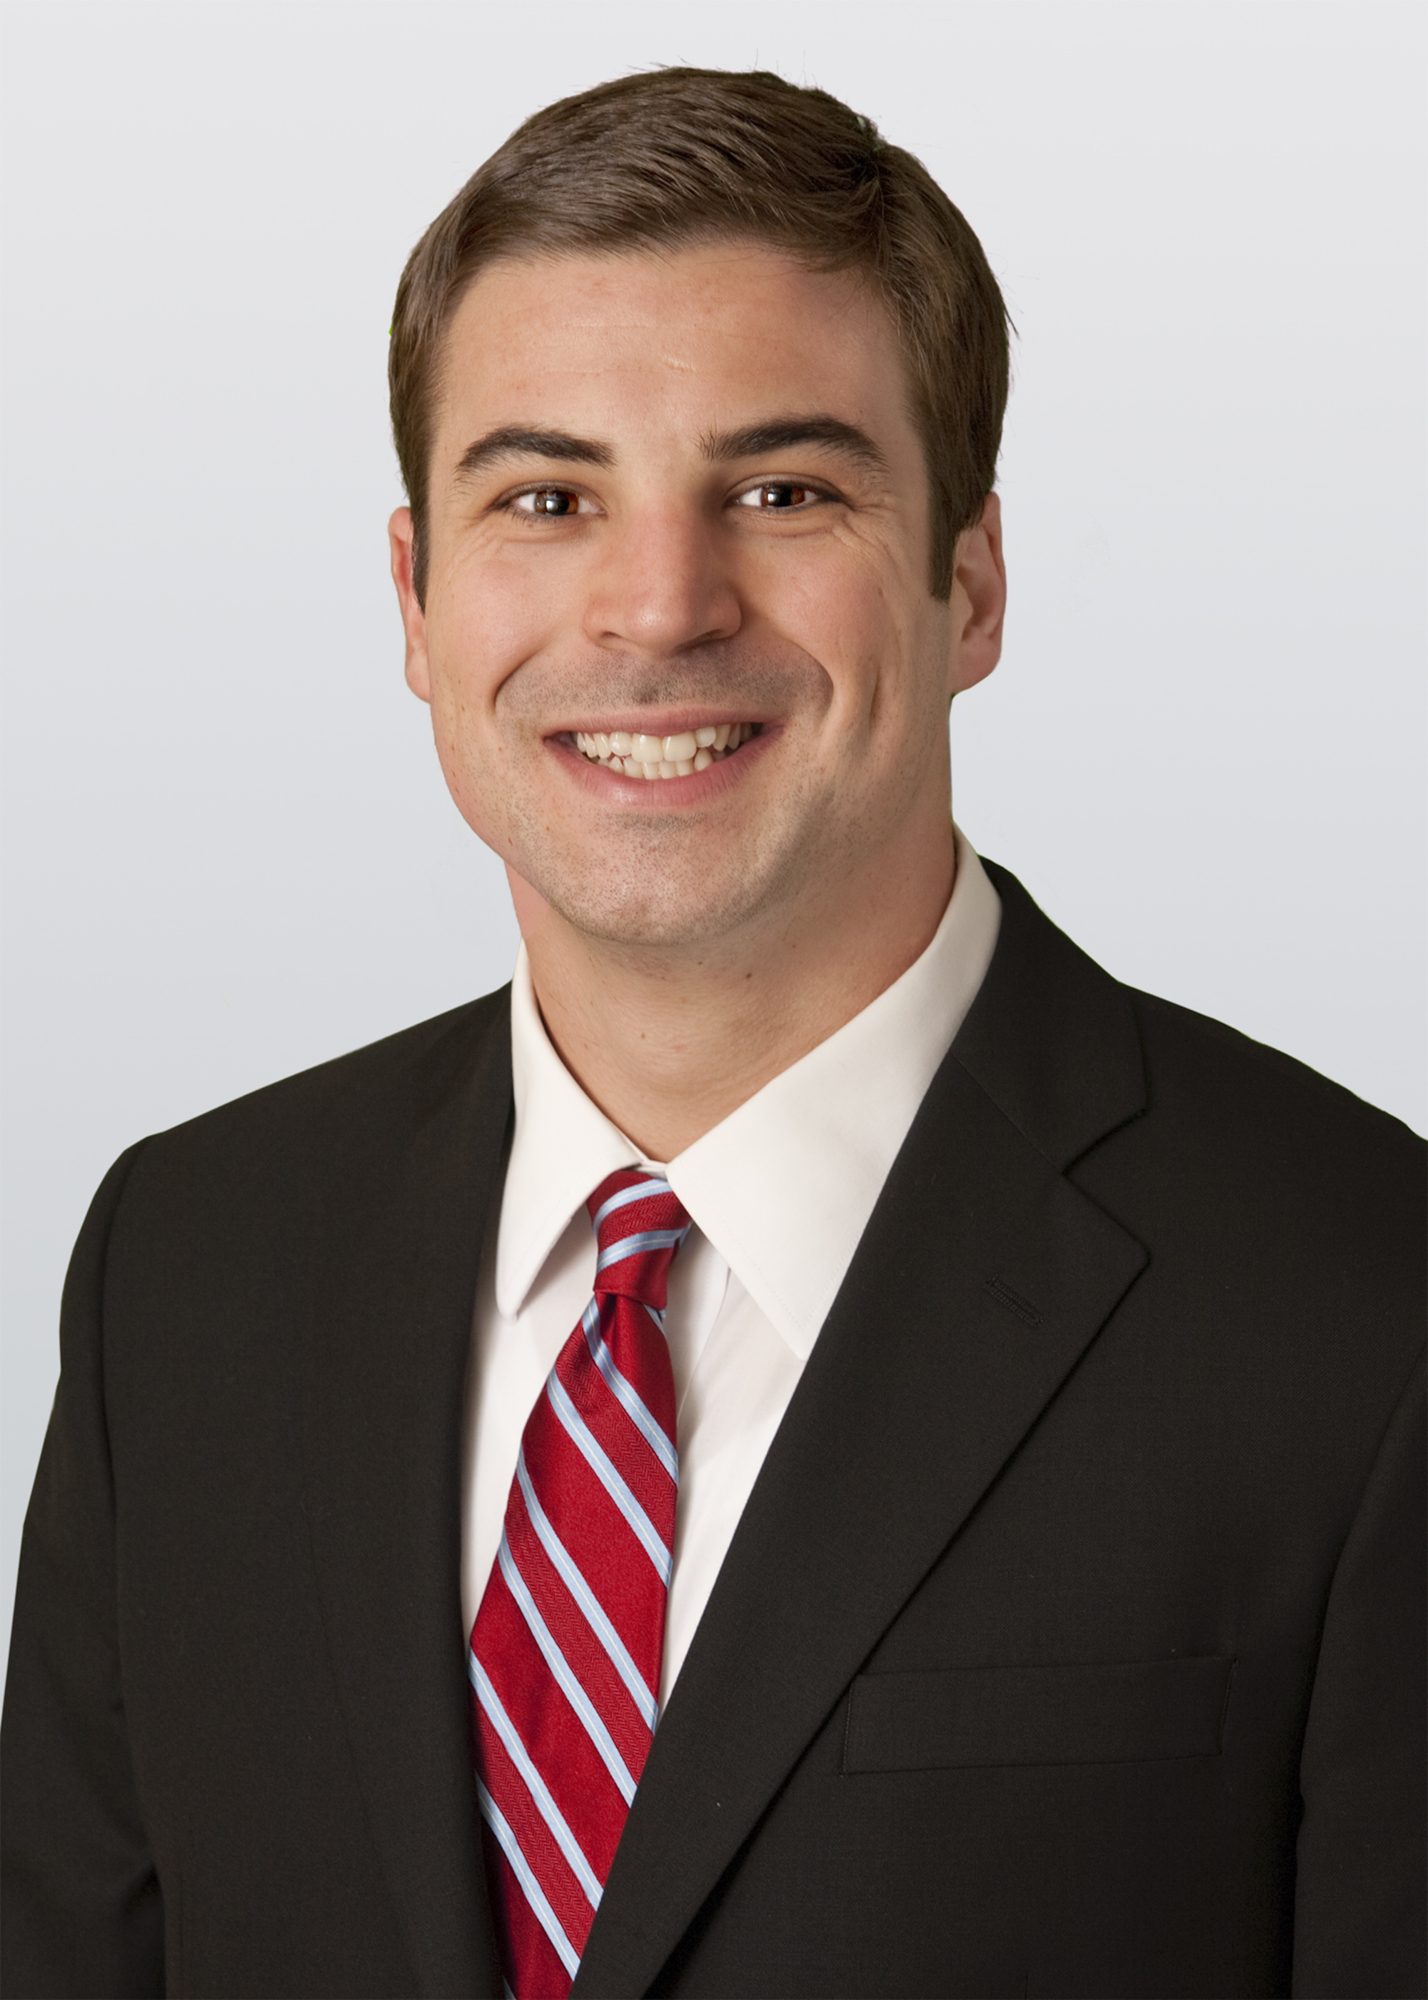 COURTESY PHOTO — Anthony Palermo was named a Holland & Knight partner earlier this month.